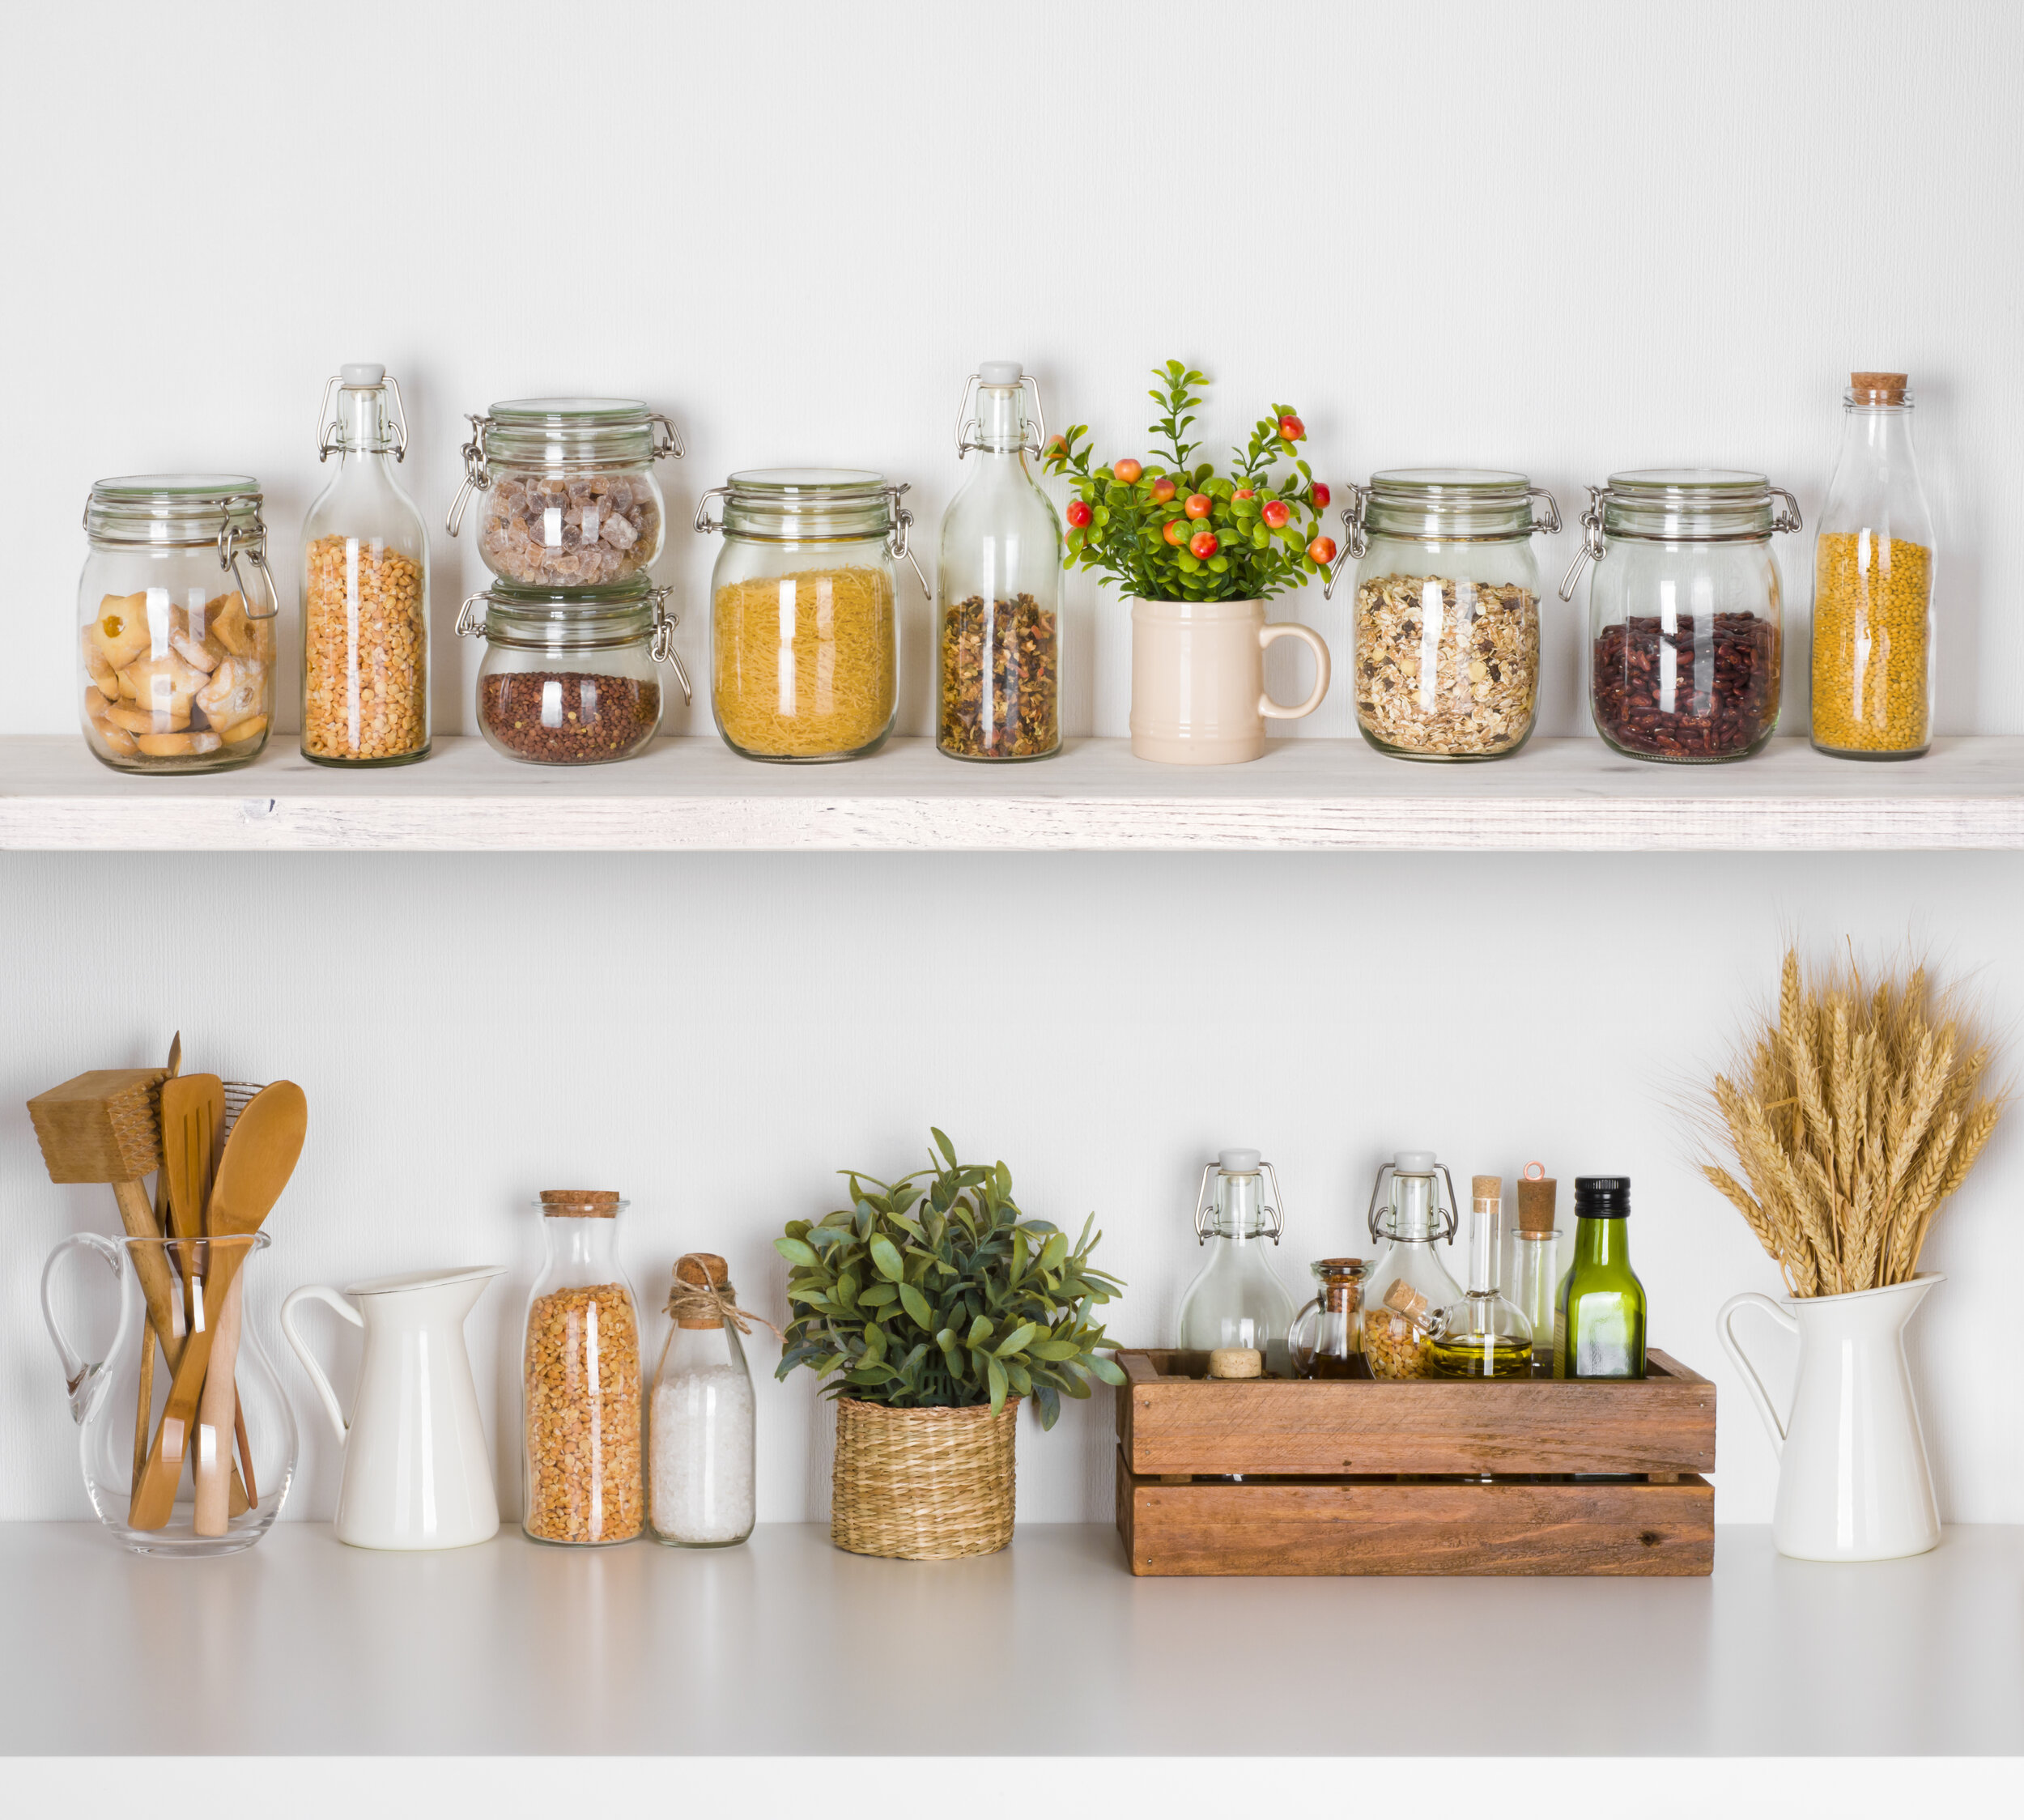 Stocking Your Pantry